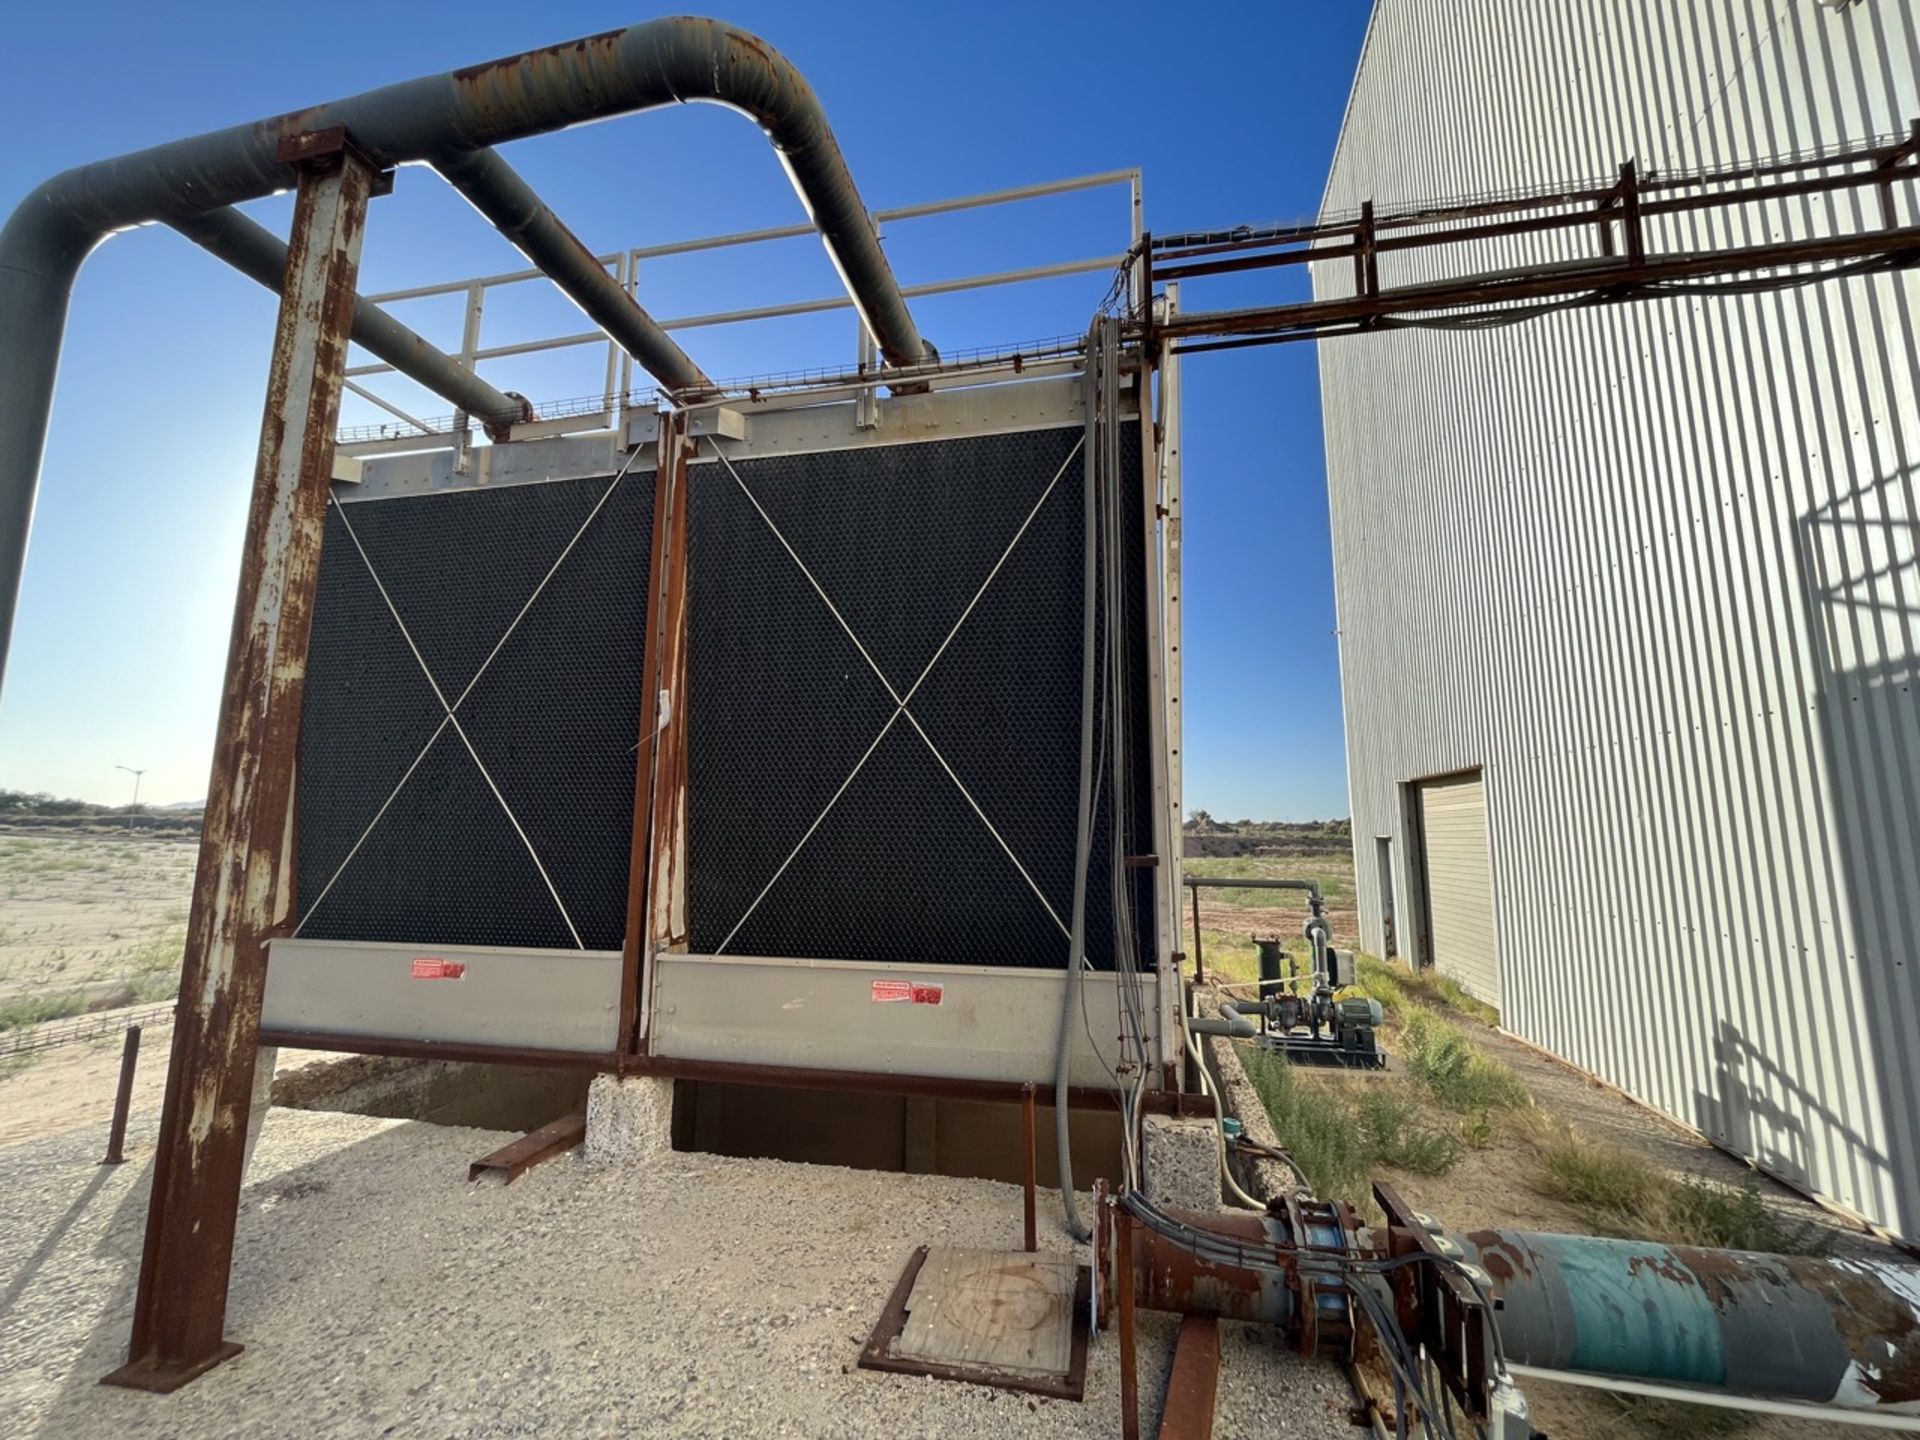 SPX Marley Cooling Tower, Model NC8403TAN2BGF, Series 10090866-A2-NC8403BG-14, Year 2009; 1 cell 25 - Image 6 of 23